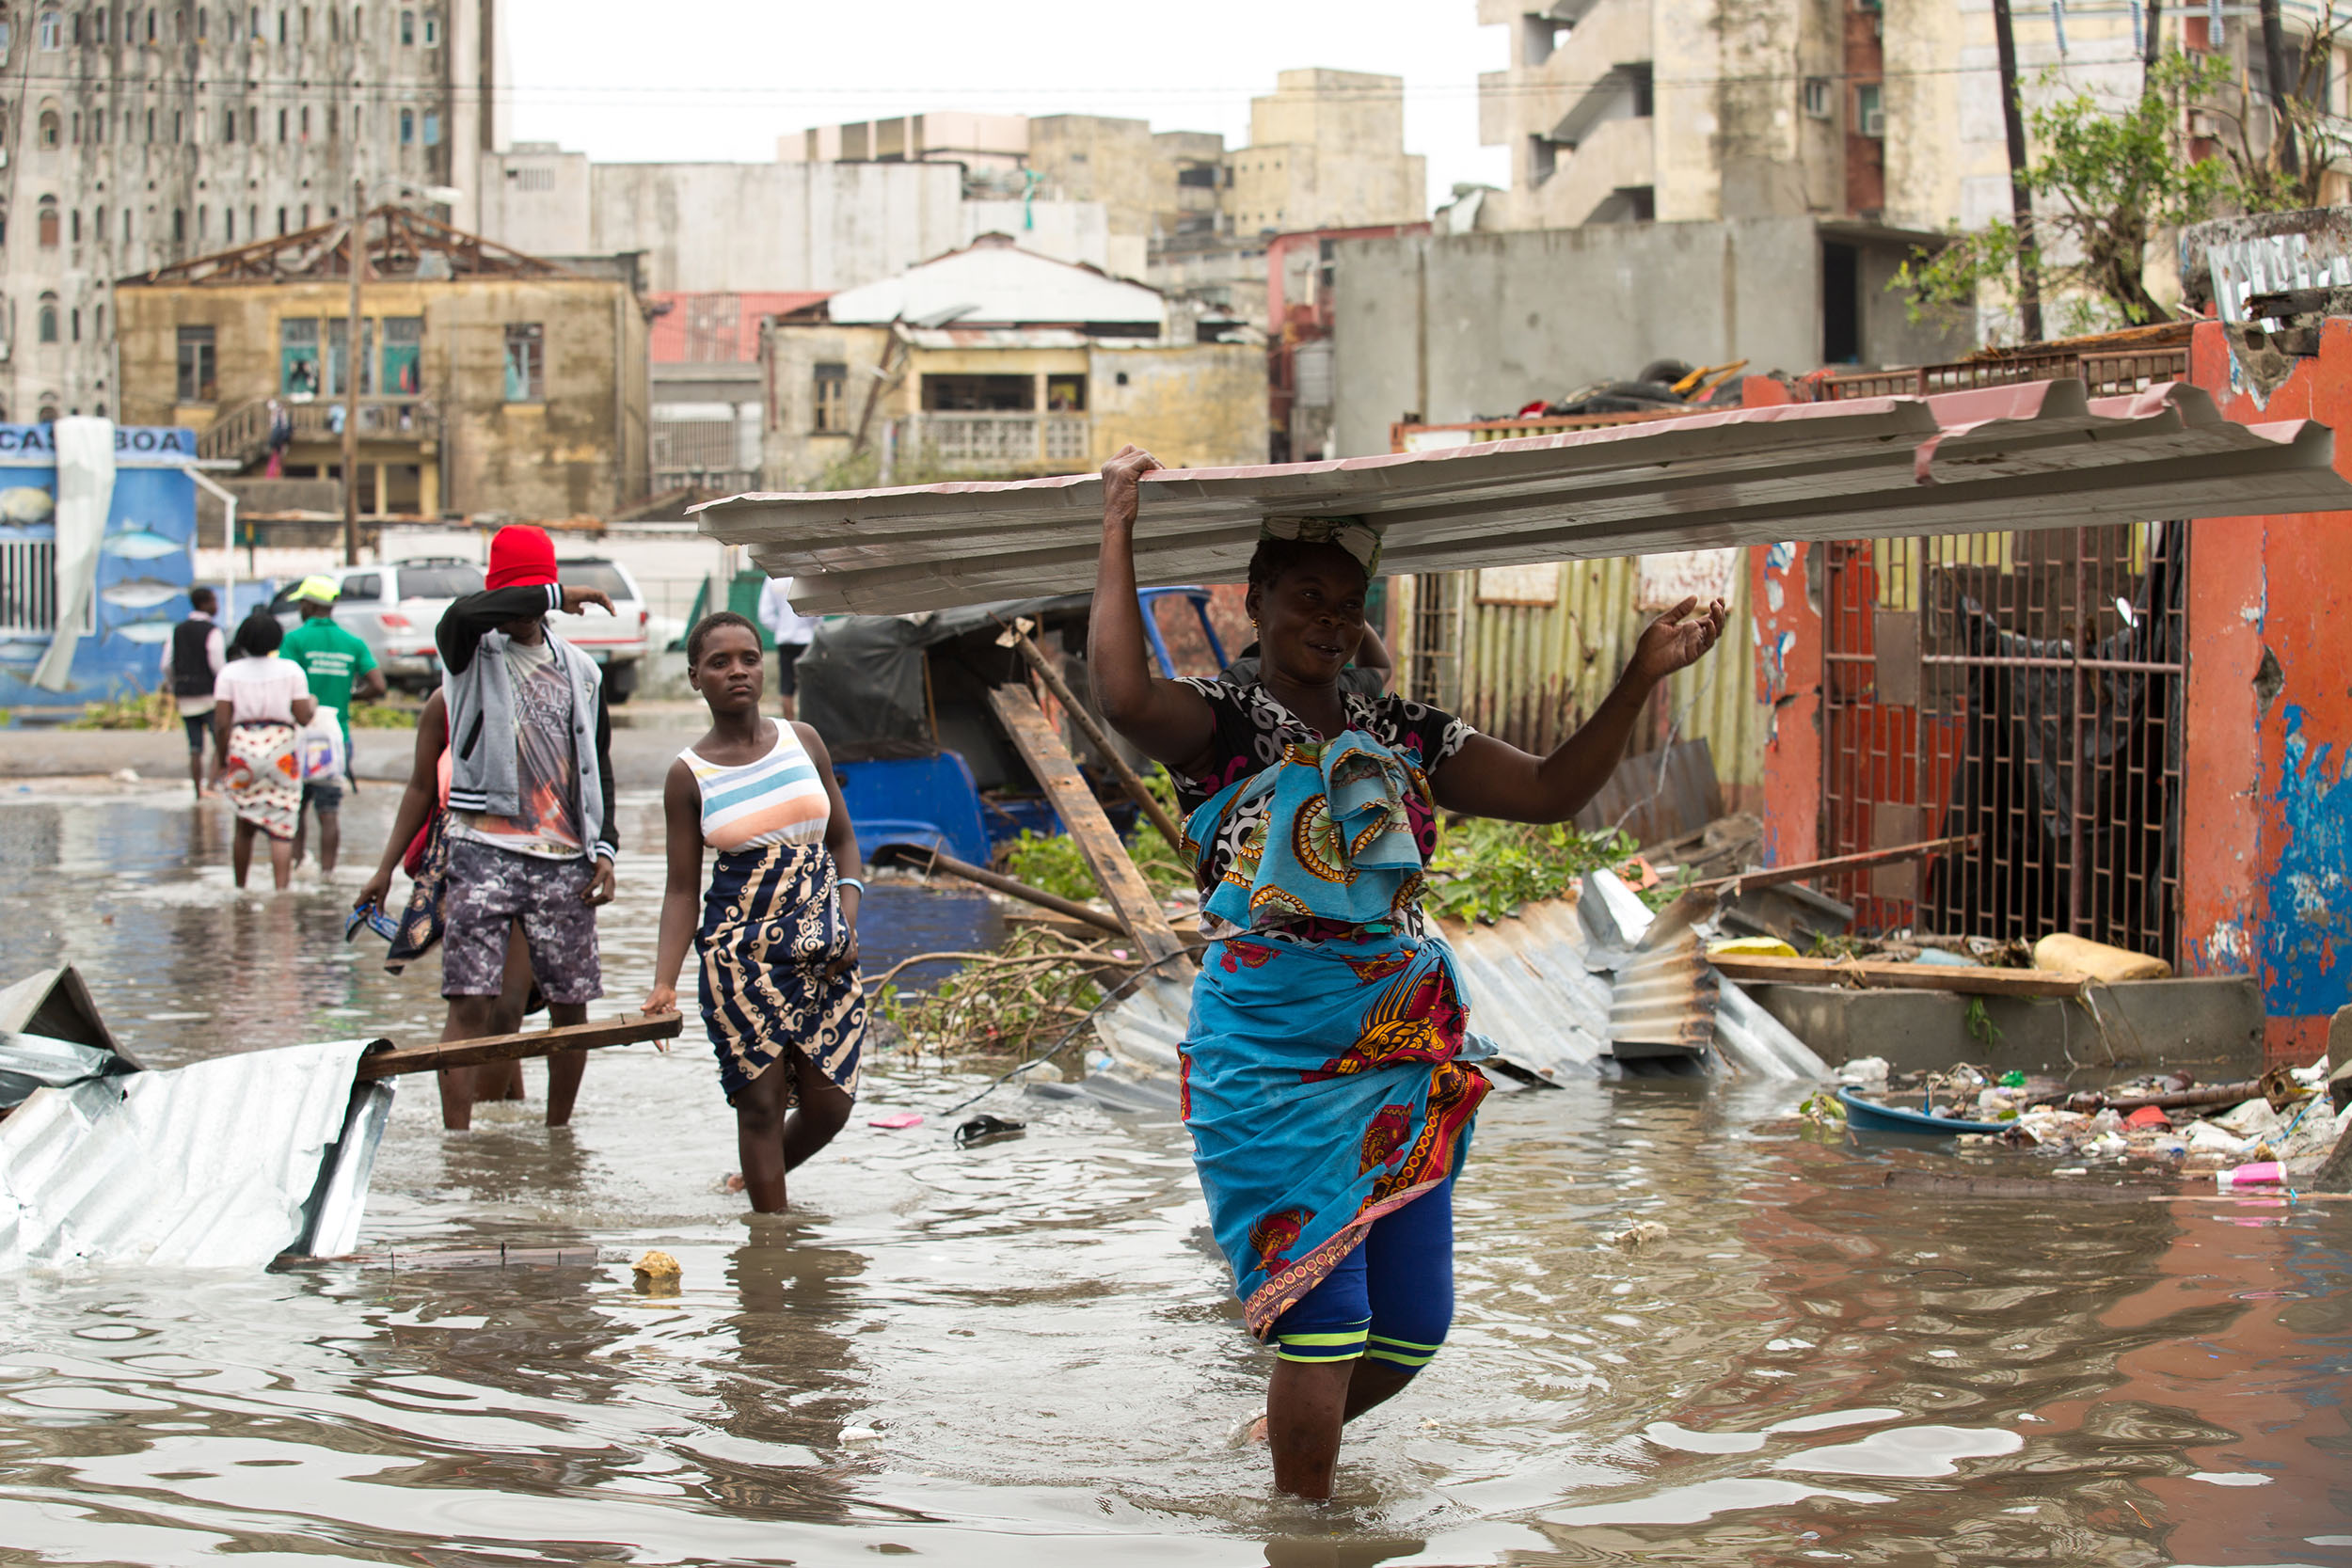 Black people wade along a flooded city street, knee-deep in dirty water and surrounded by debris. In the foreground, one person carries a large piece of corrugated metal on her head.